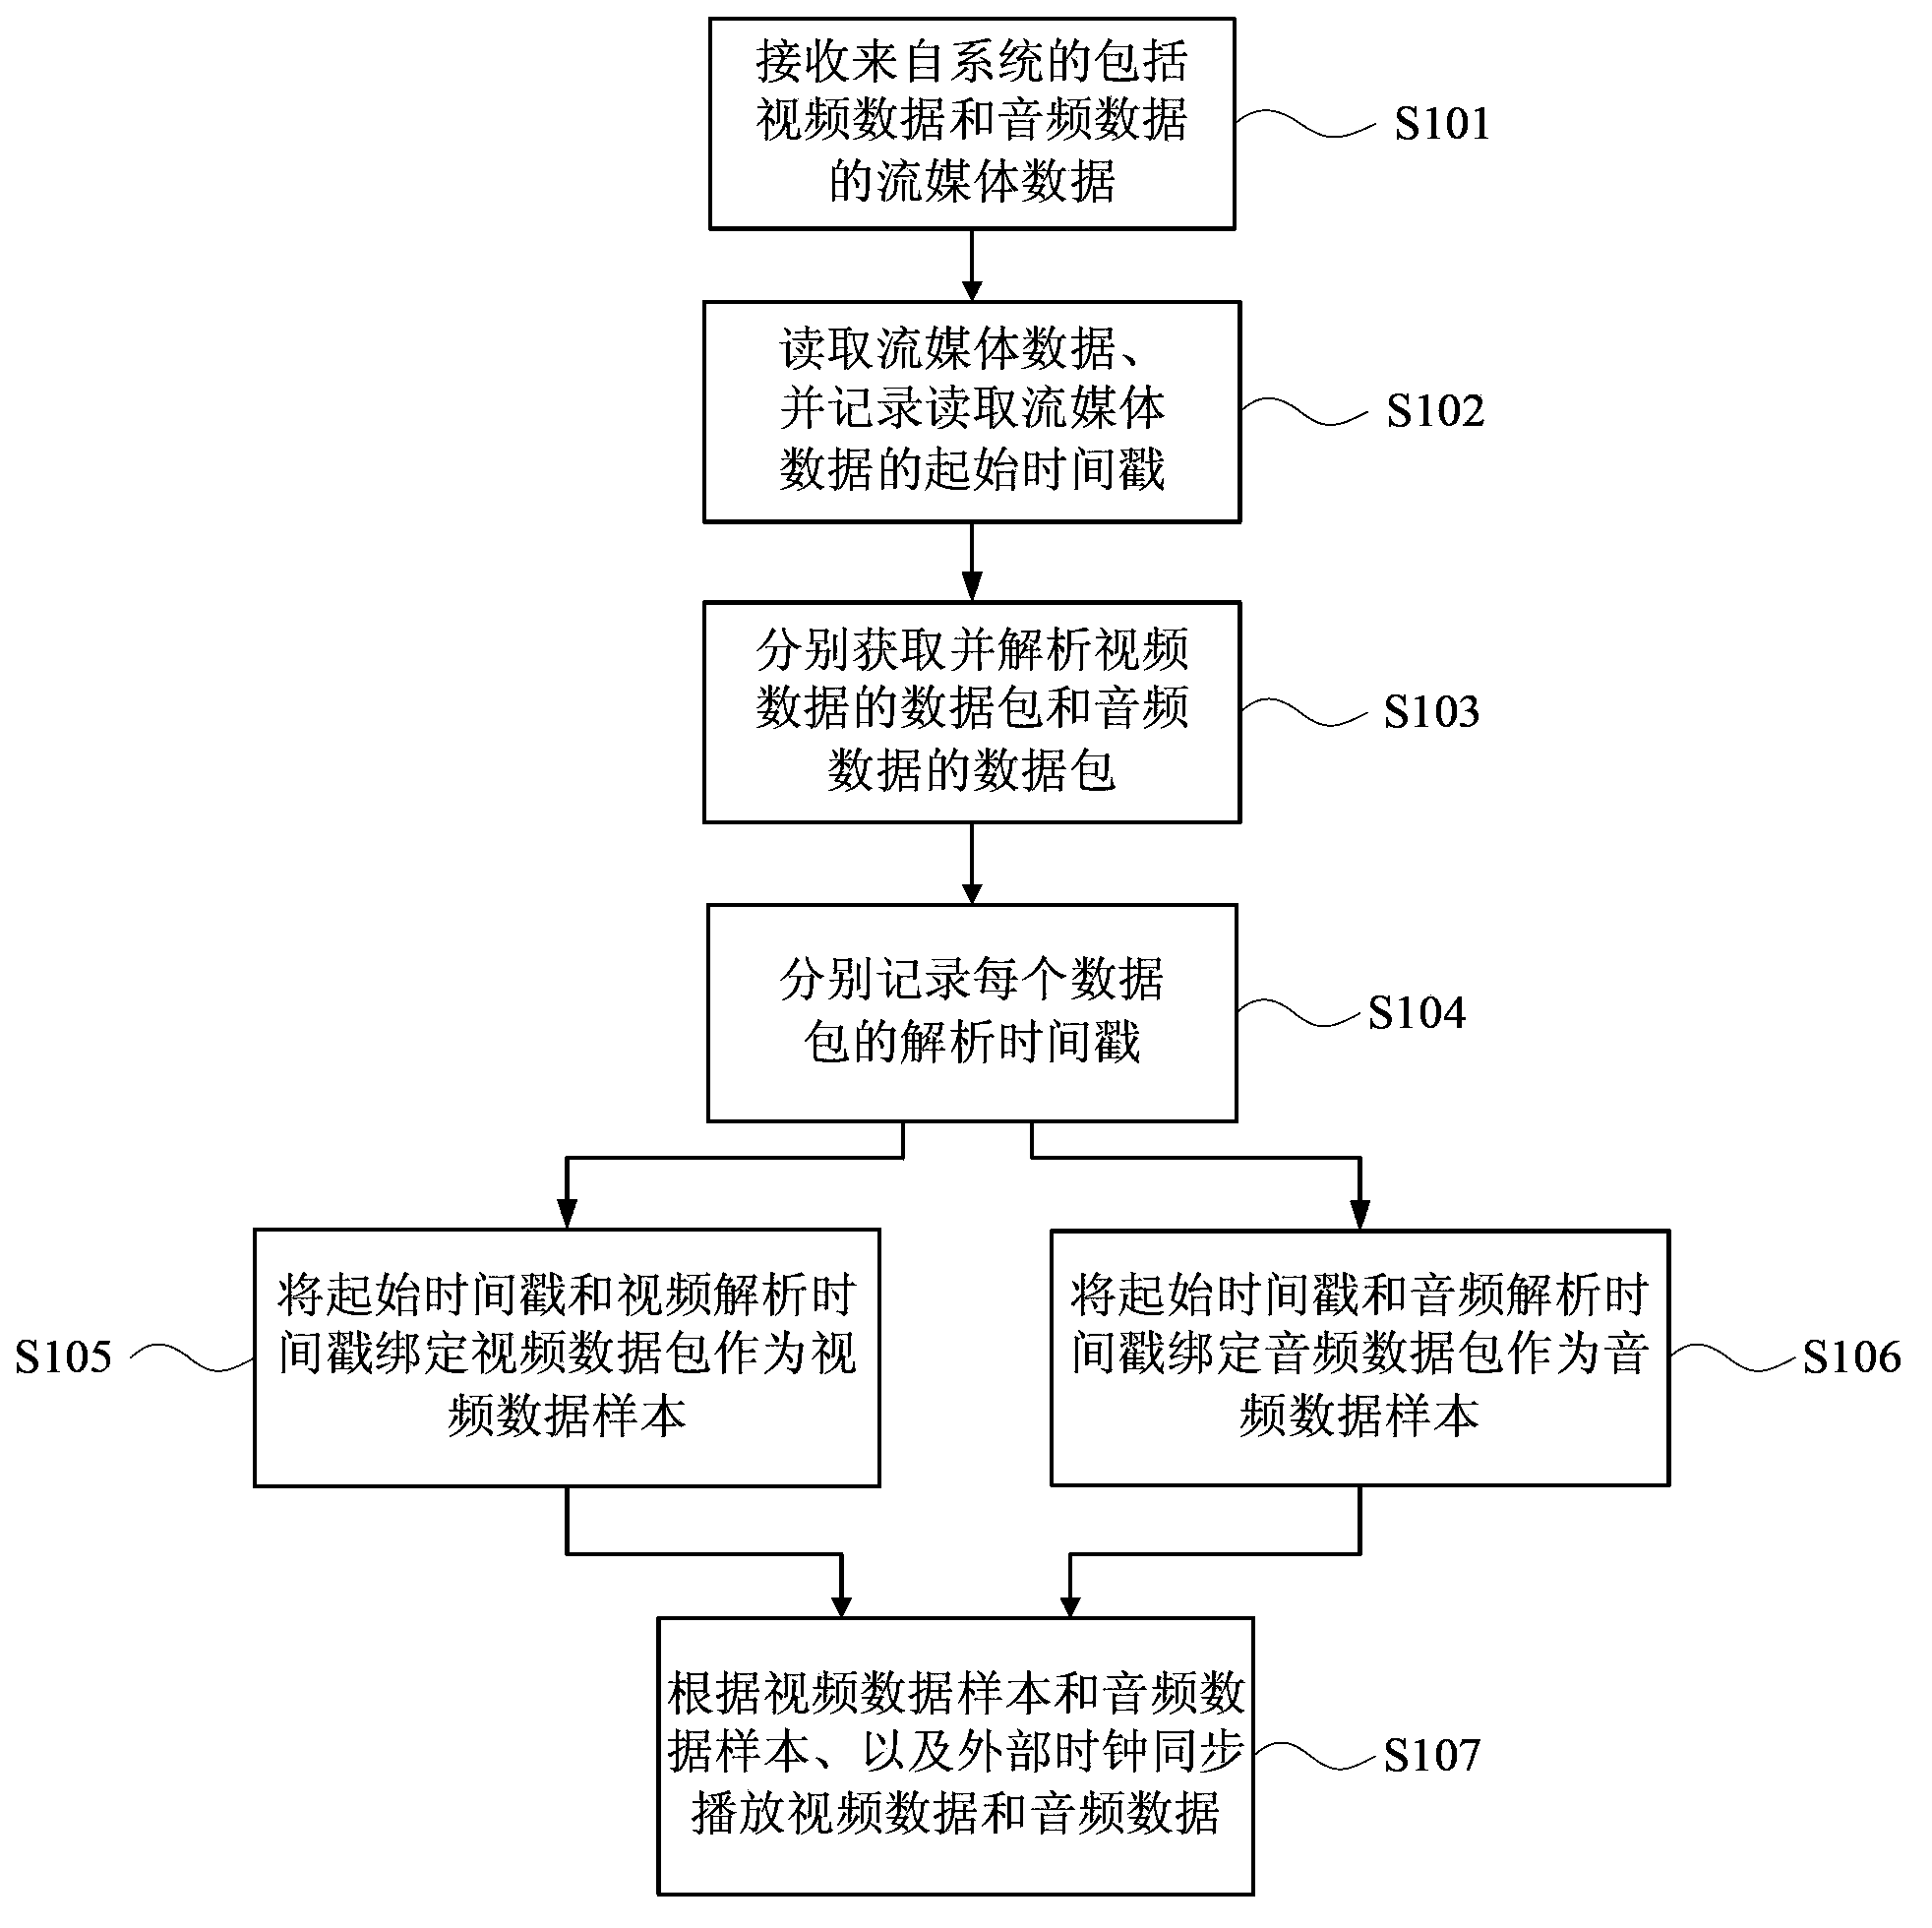 Synchronous audio and video playing method and device